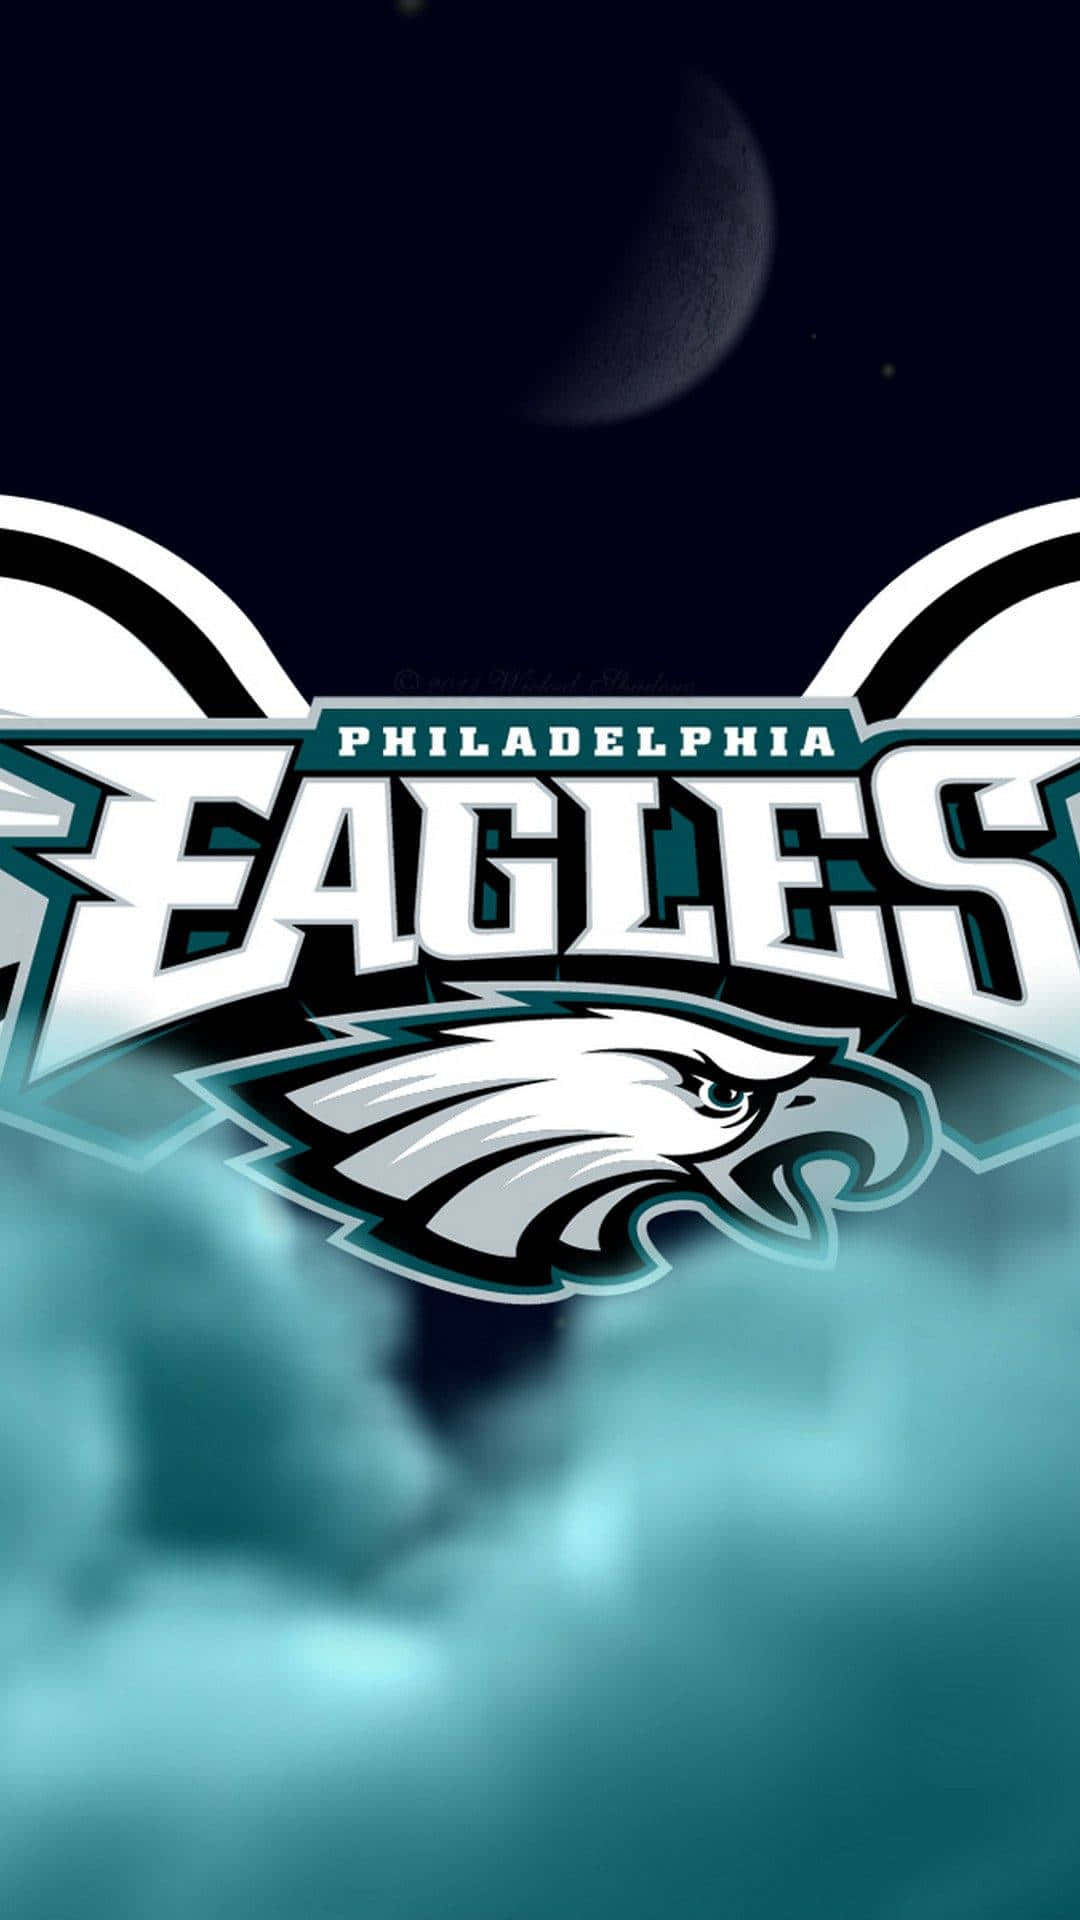 Get Ready for the New Season with the Philadelphia Eagles iPhone Wallpaper